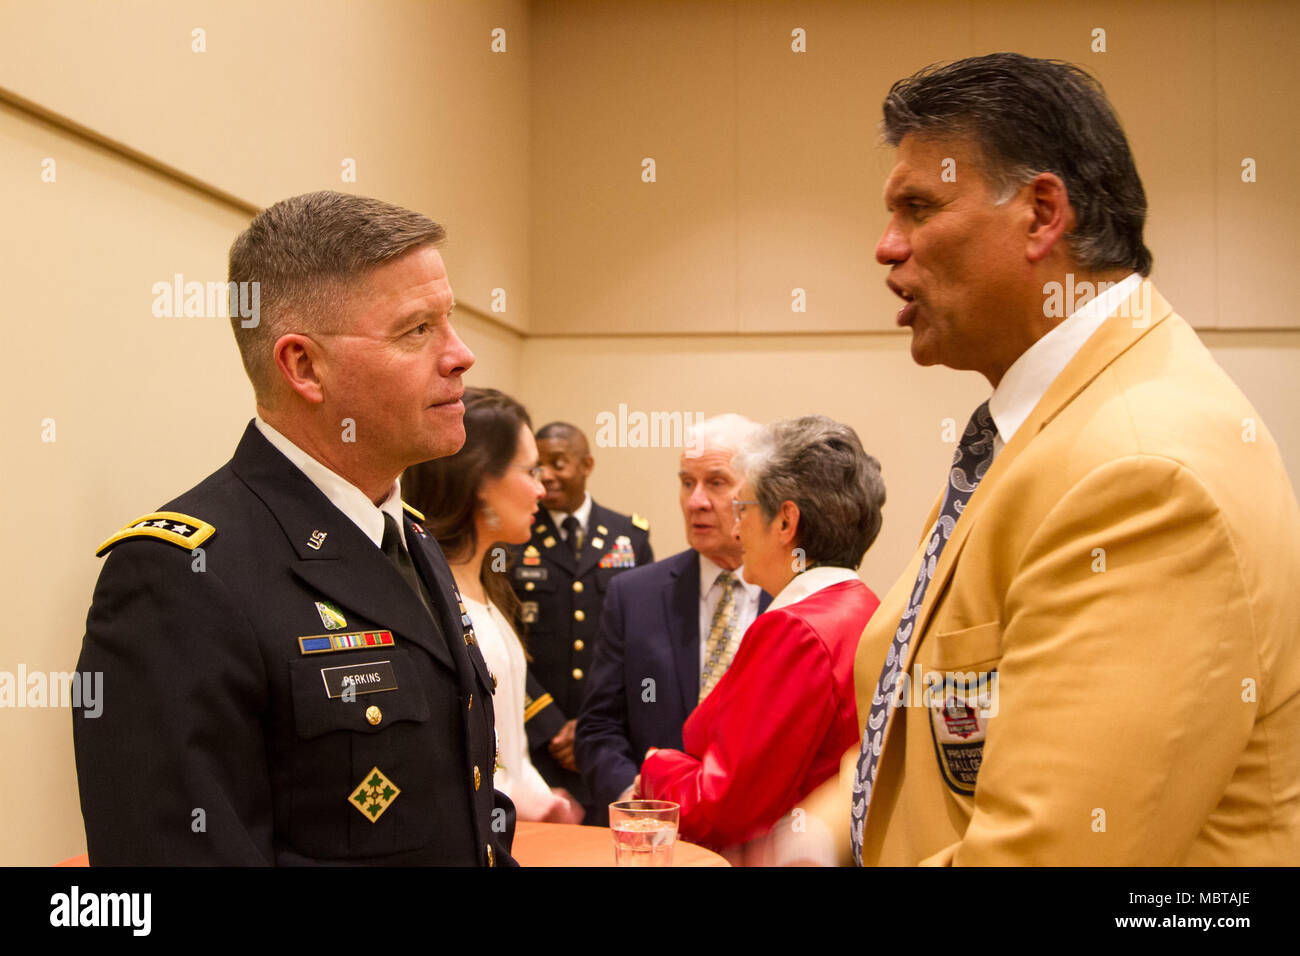 Gen David Perkins High Resolution Stock Photography and Images - Alamy